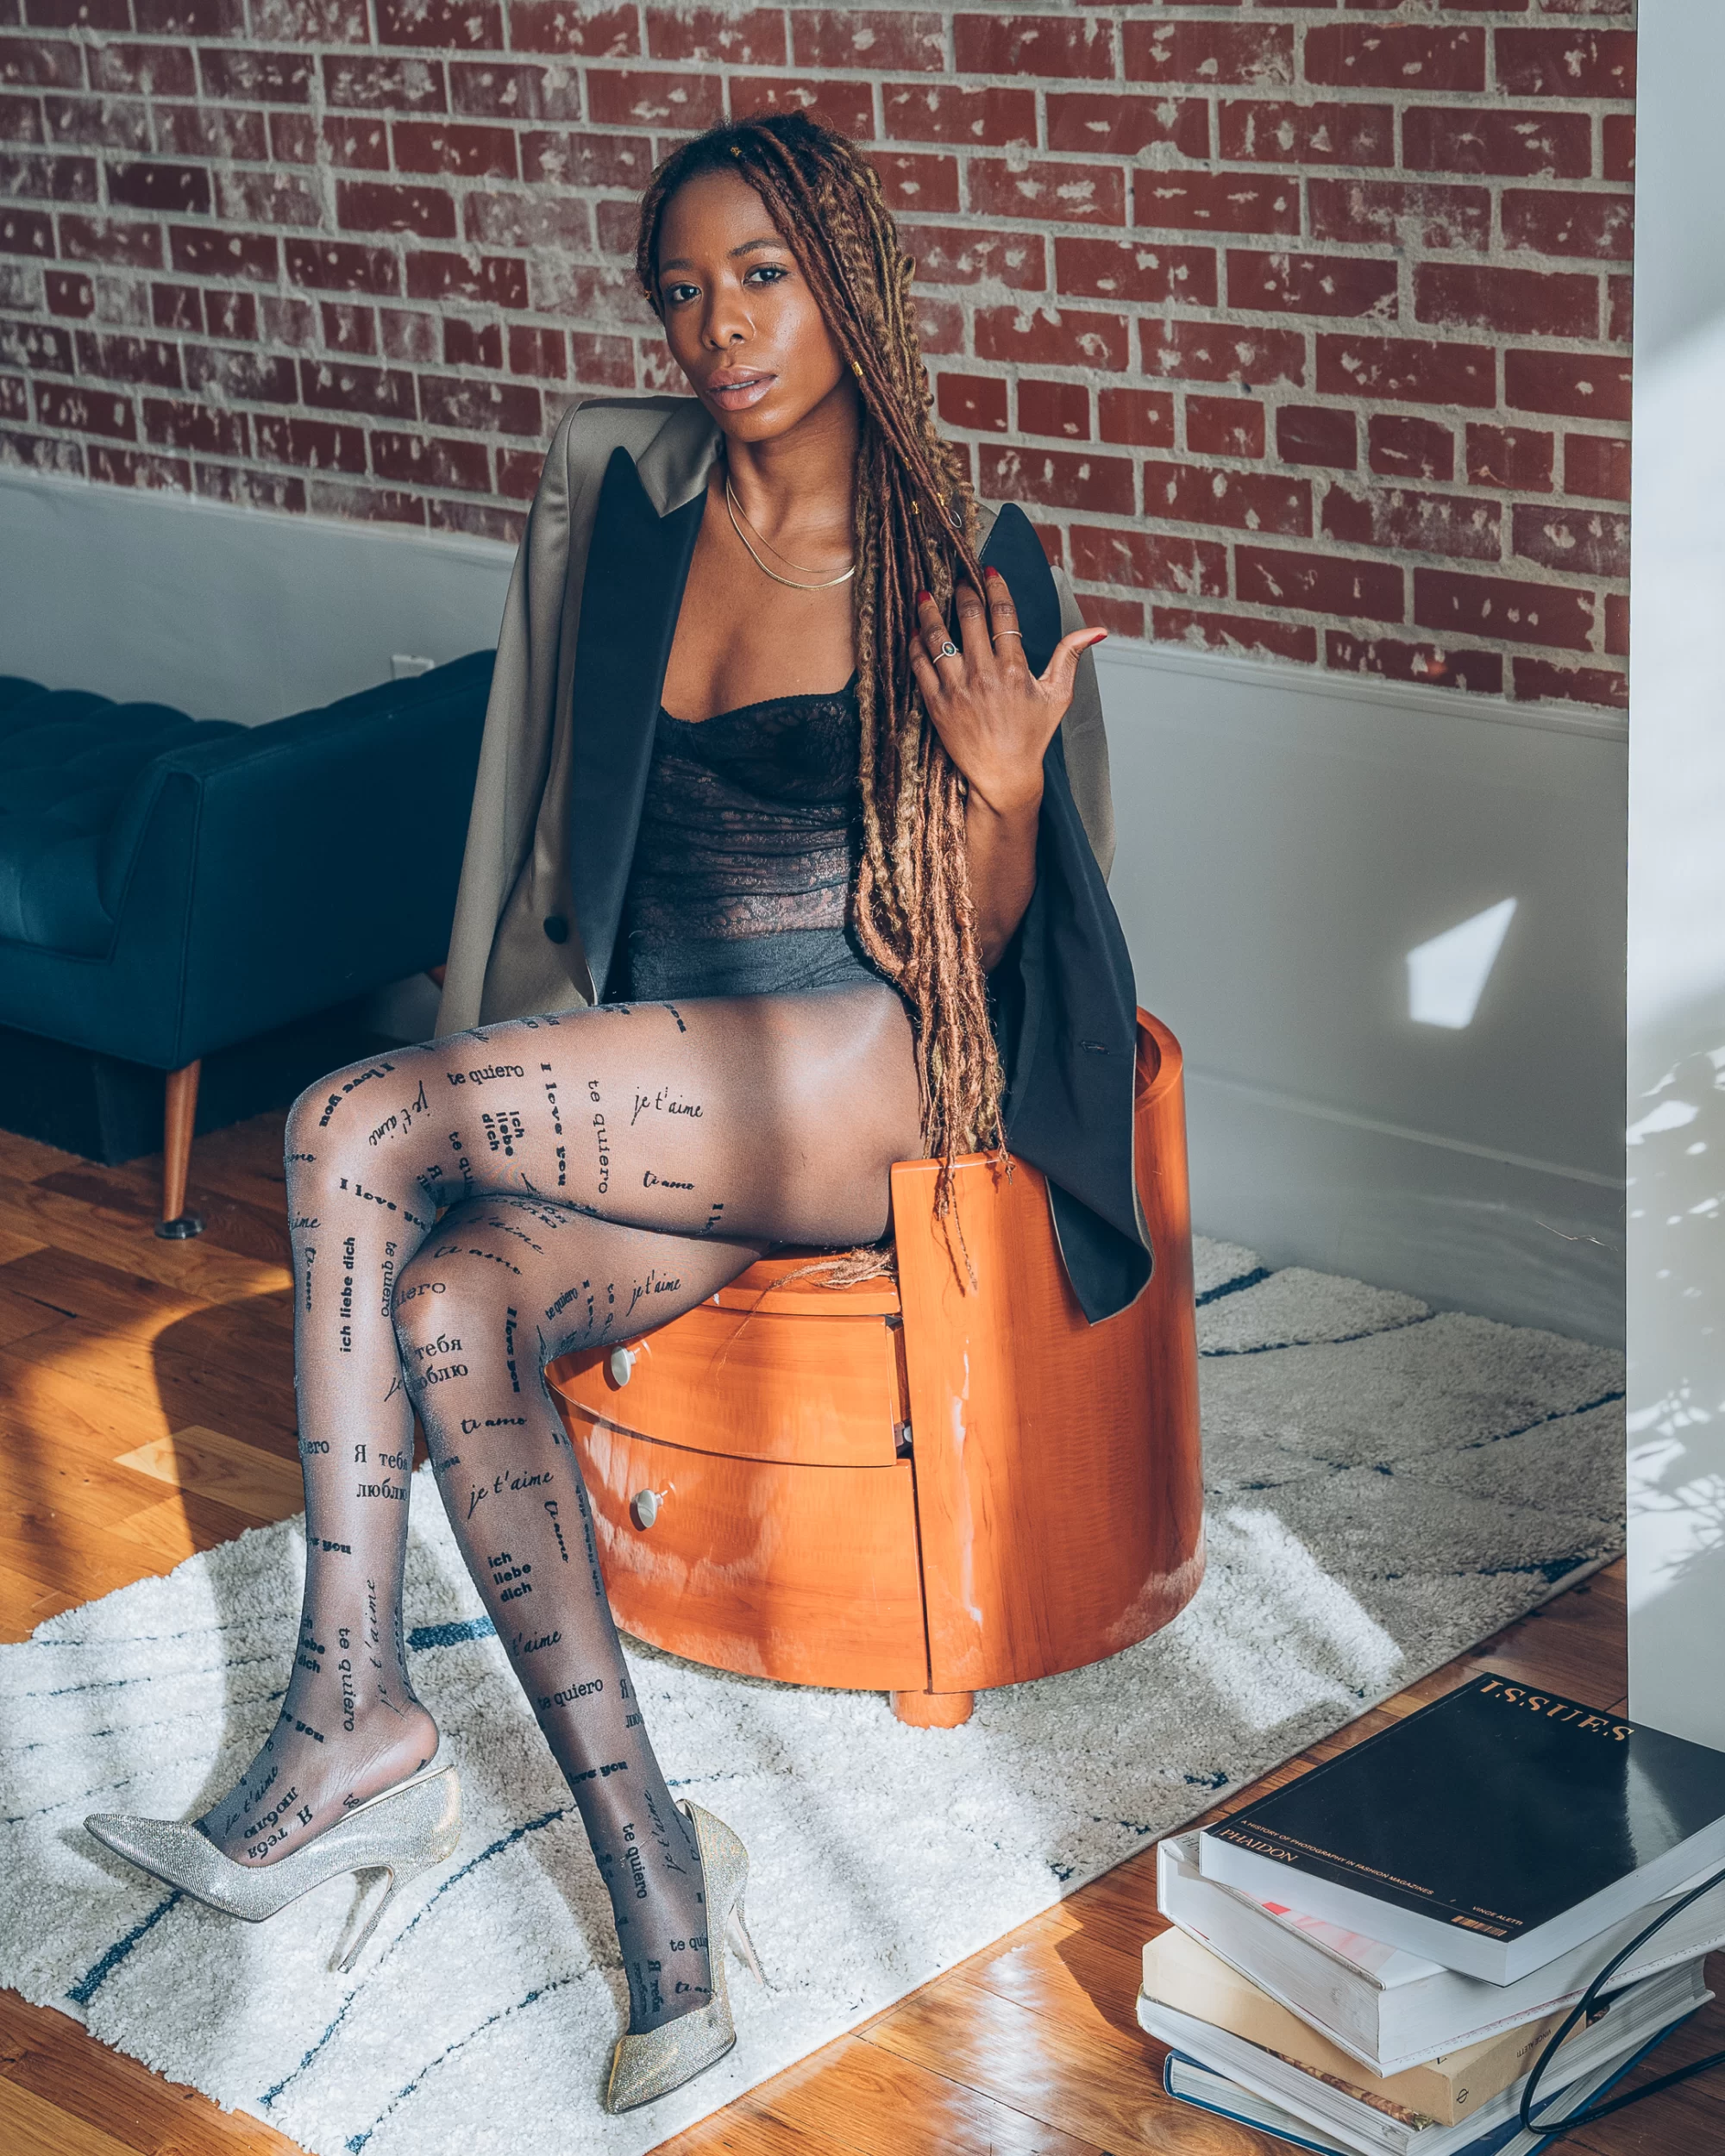 Sale Alert: Get 2 Calzedonia Tights for $25 - OpalbyOpal